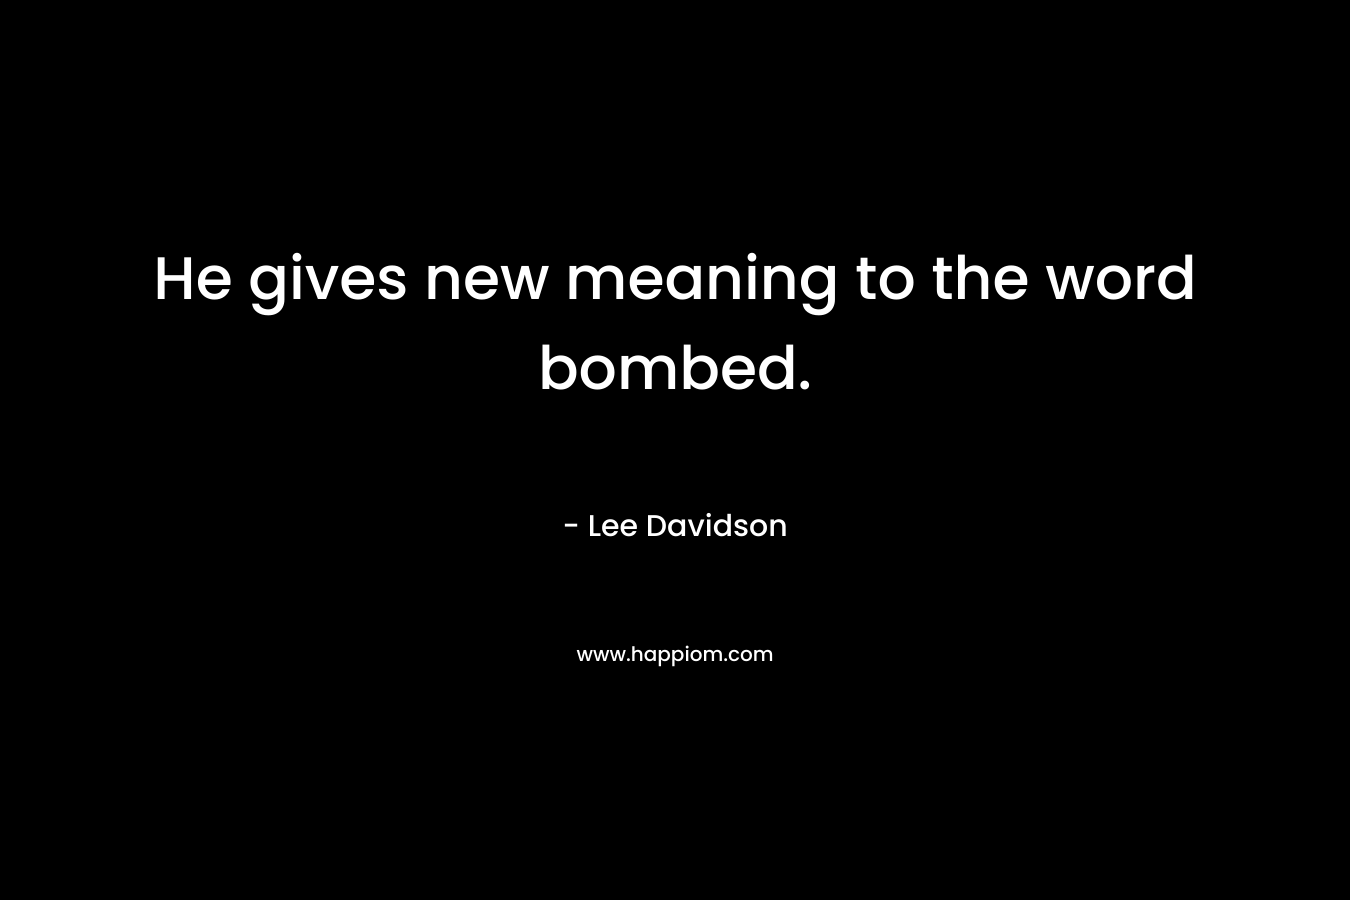 He gives new meaning to the word bombed.